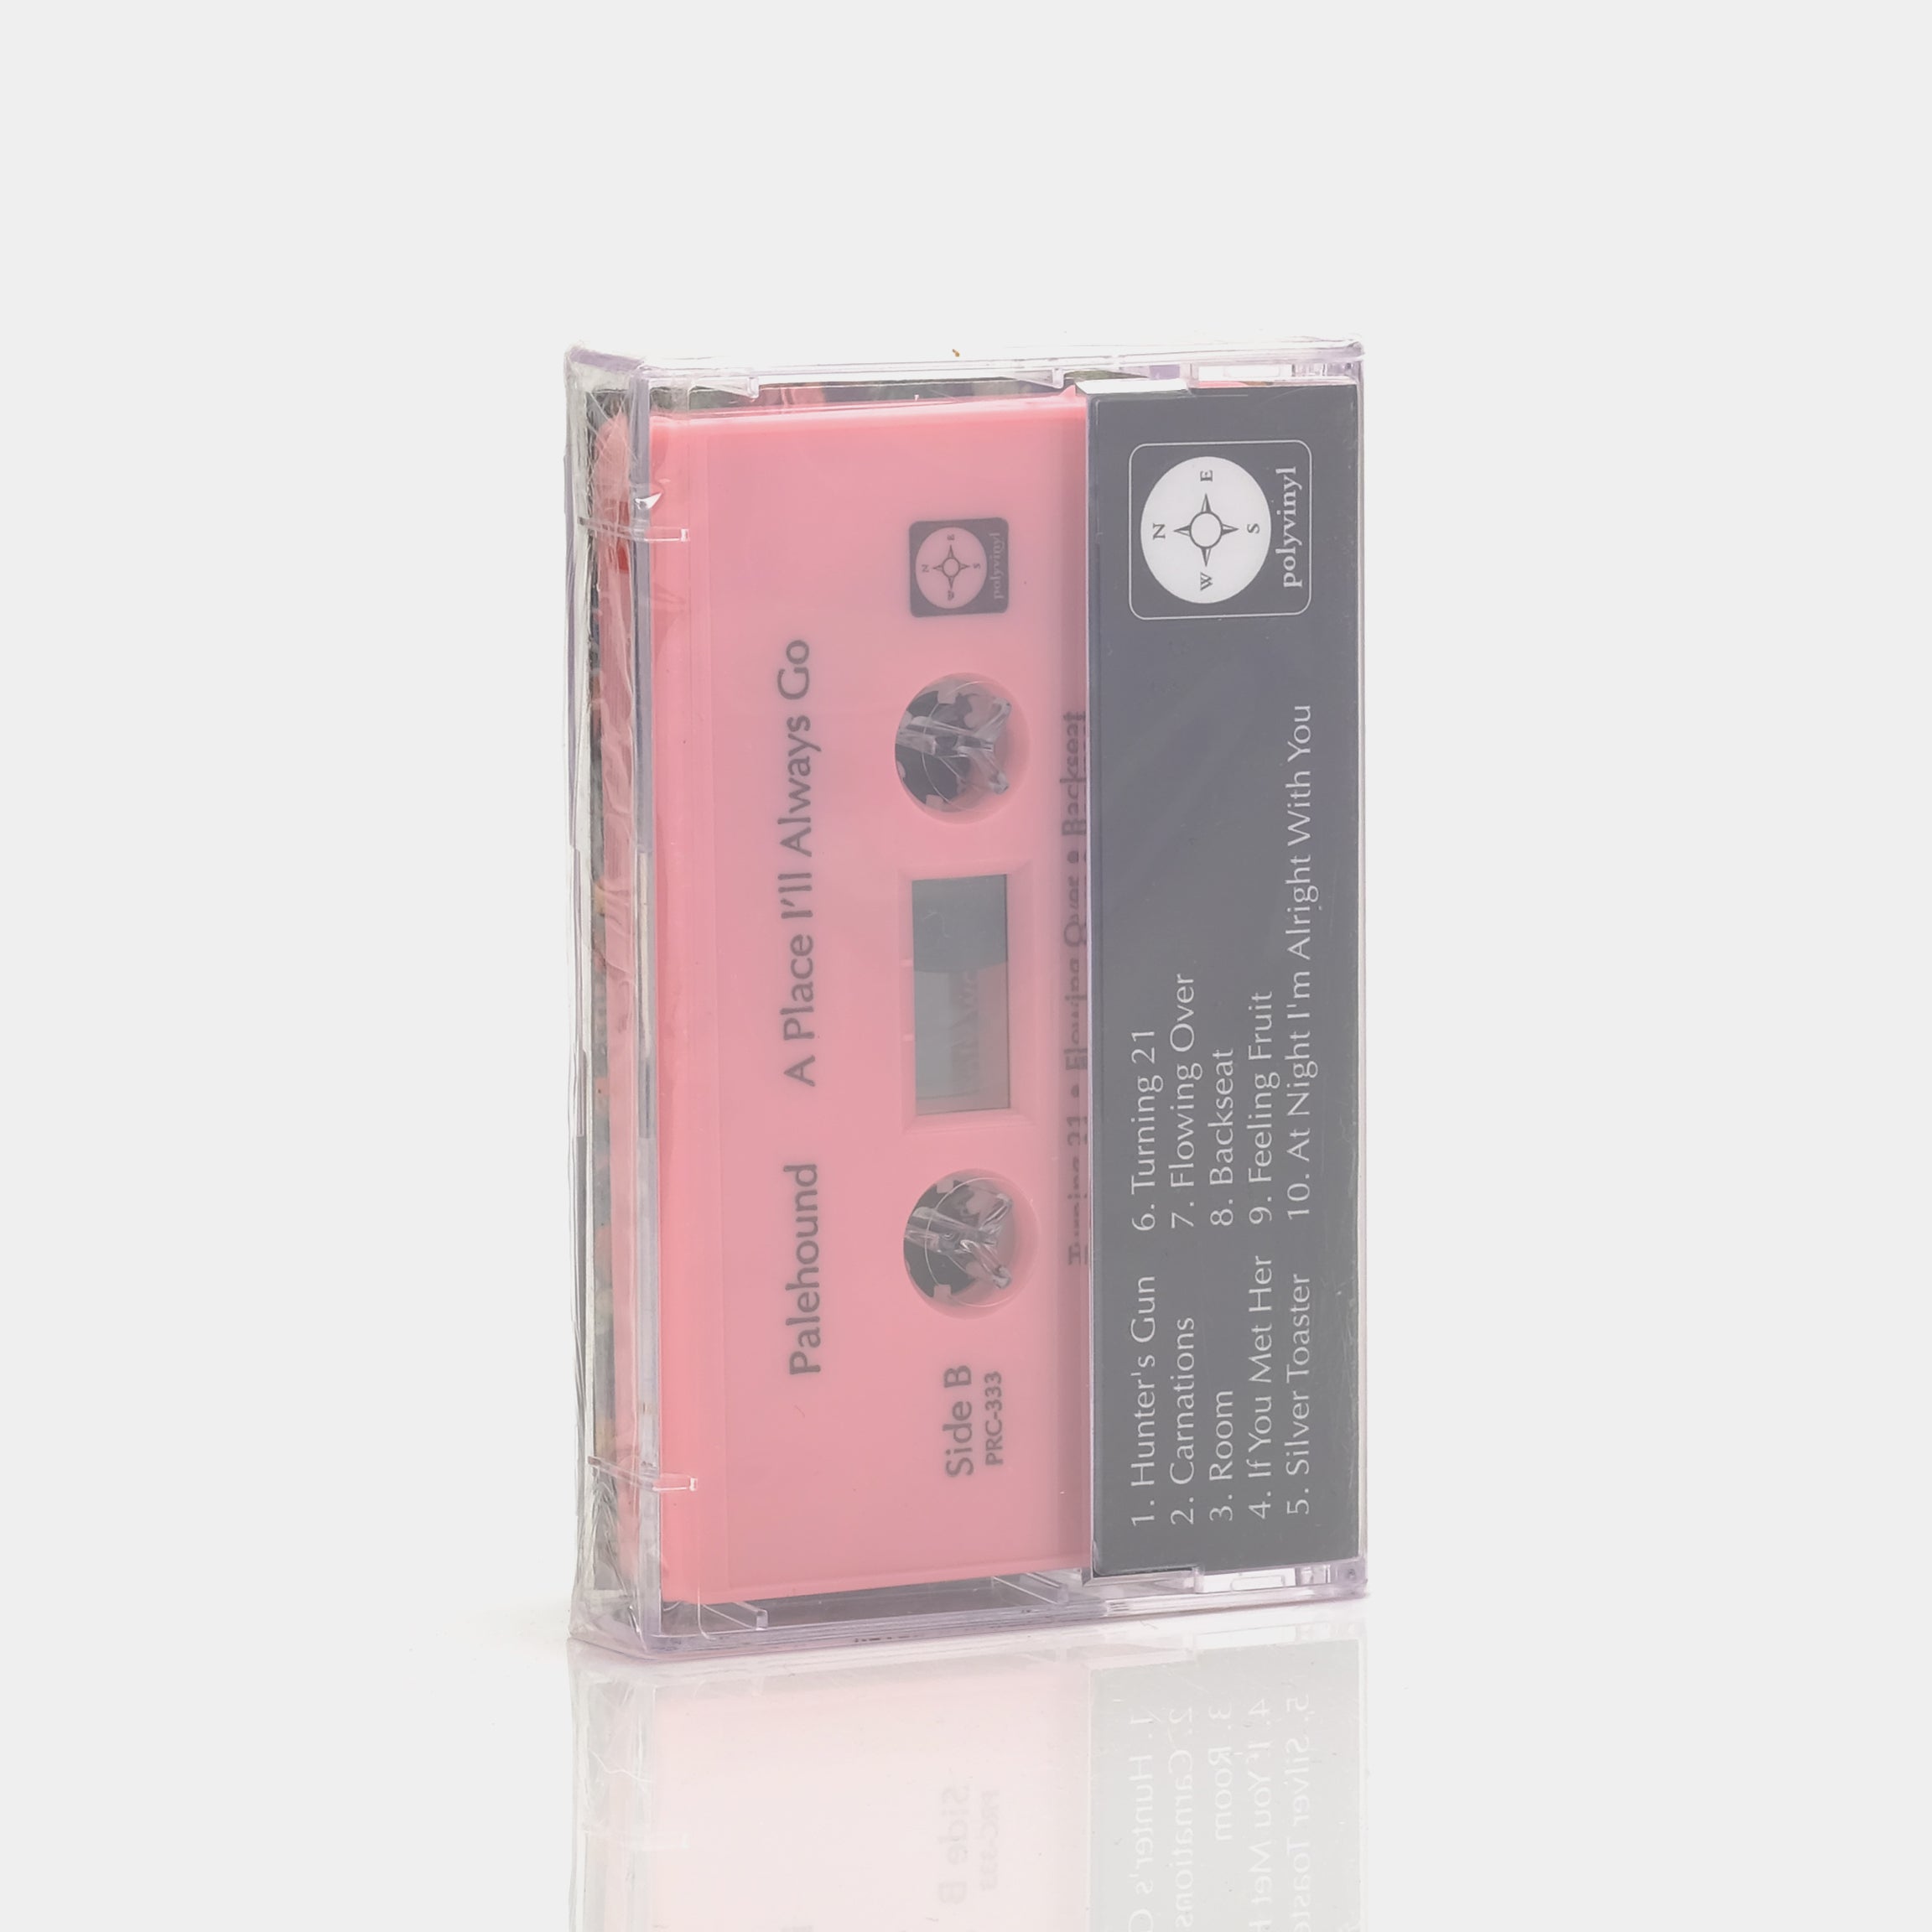 Palehound - A Place I'll Always Go Cassette Tape